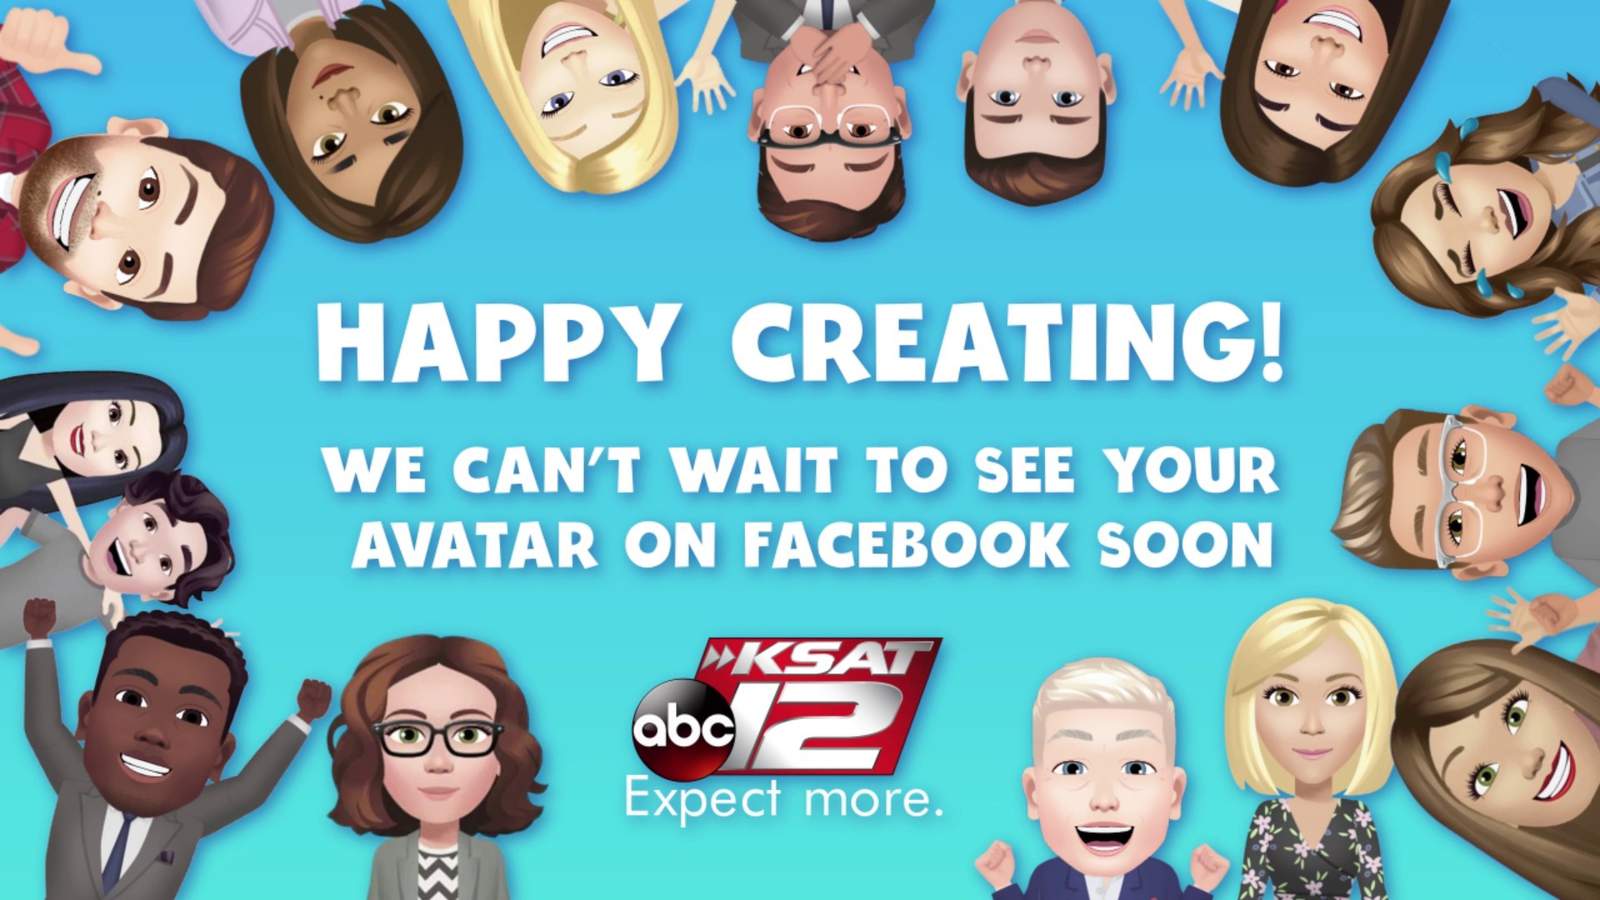 Want to make your Facebook avatar? Here’s how.